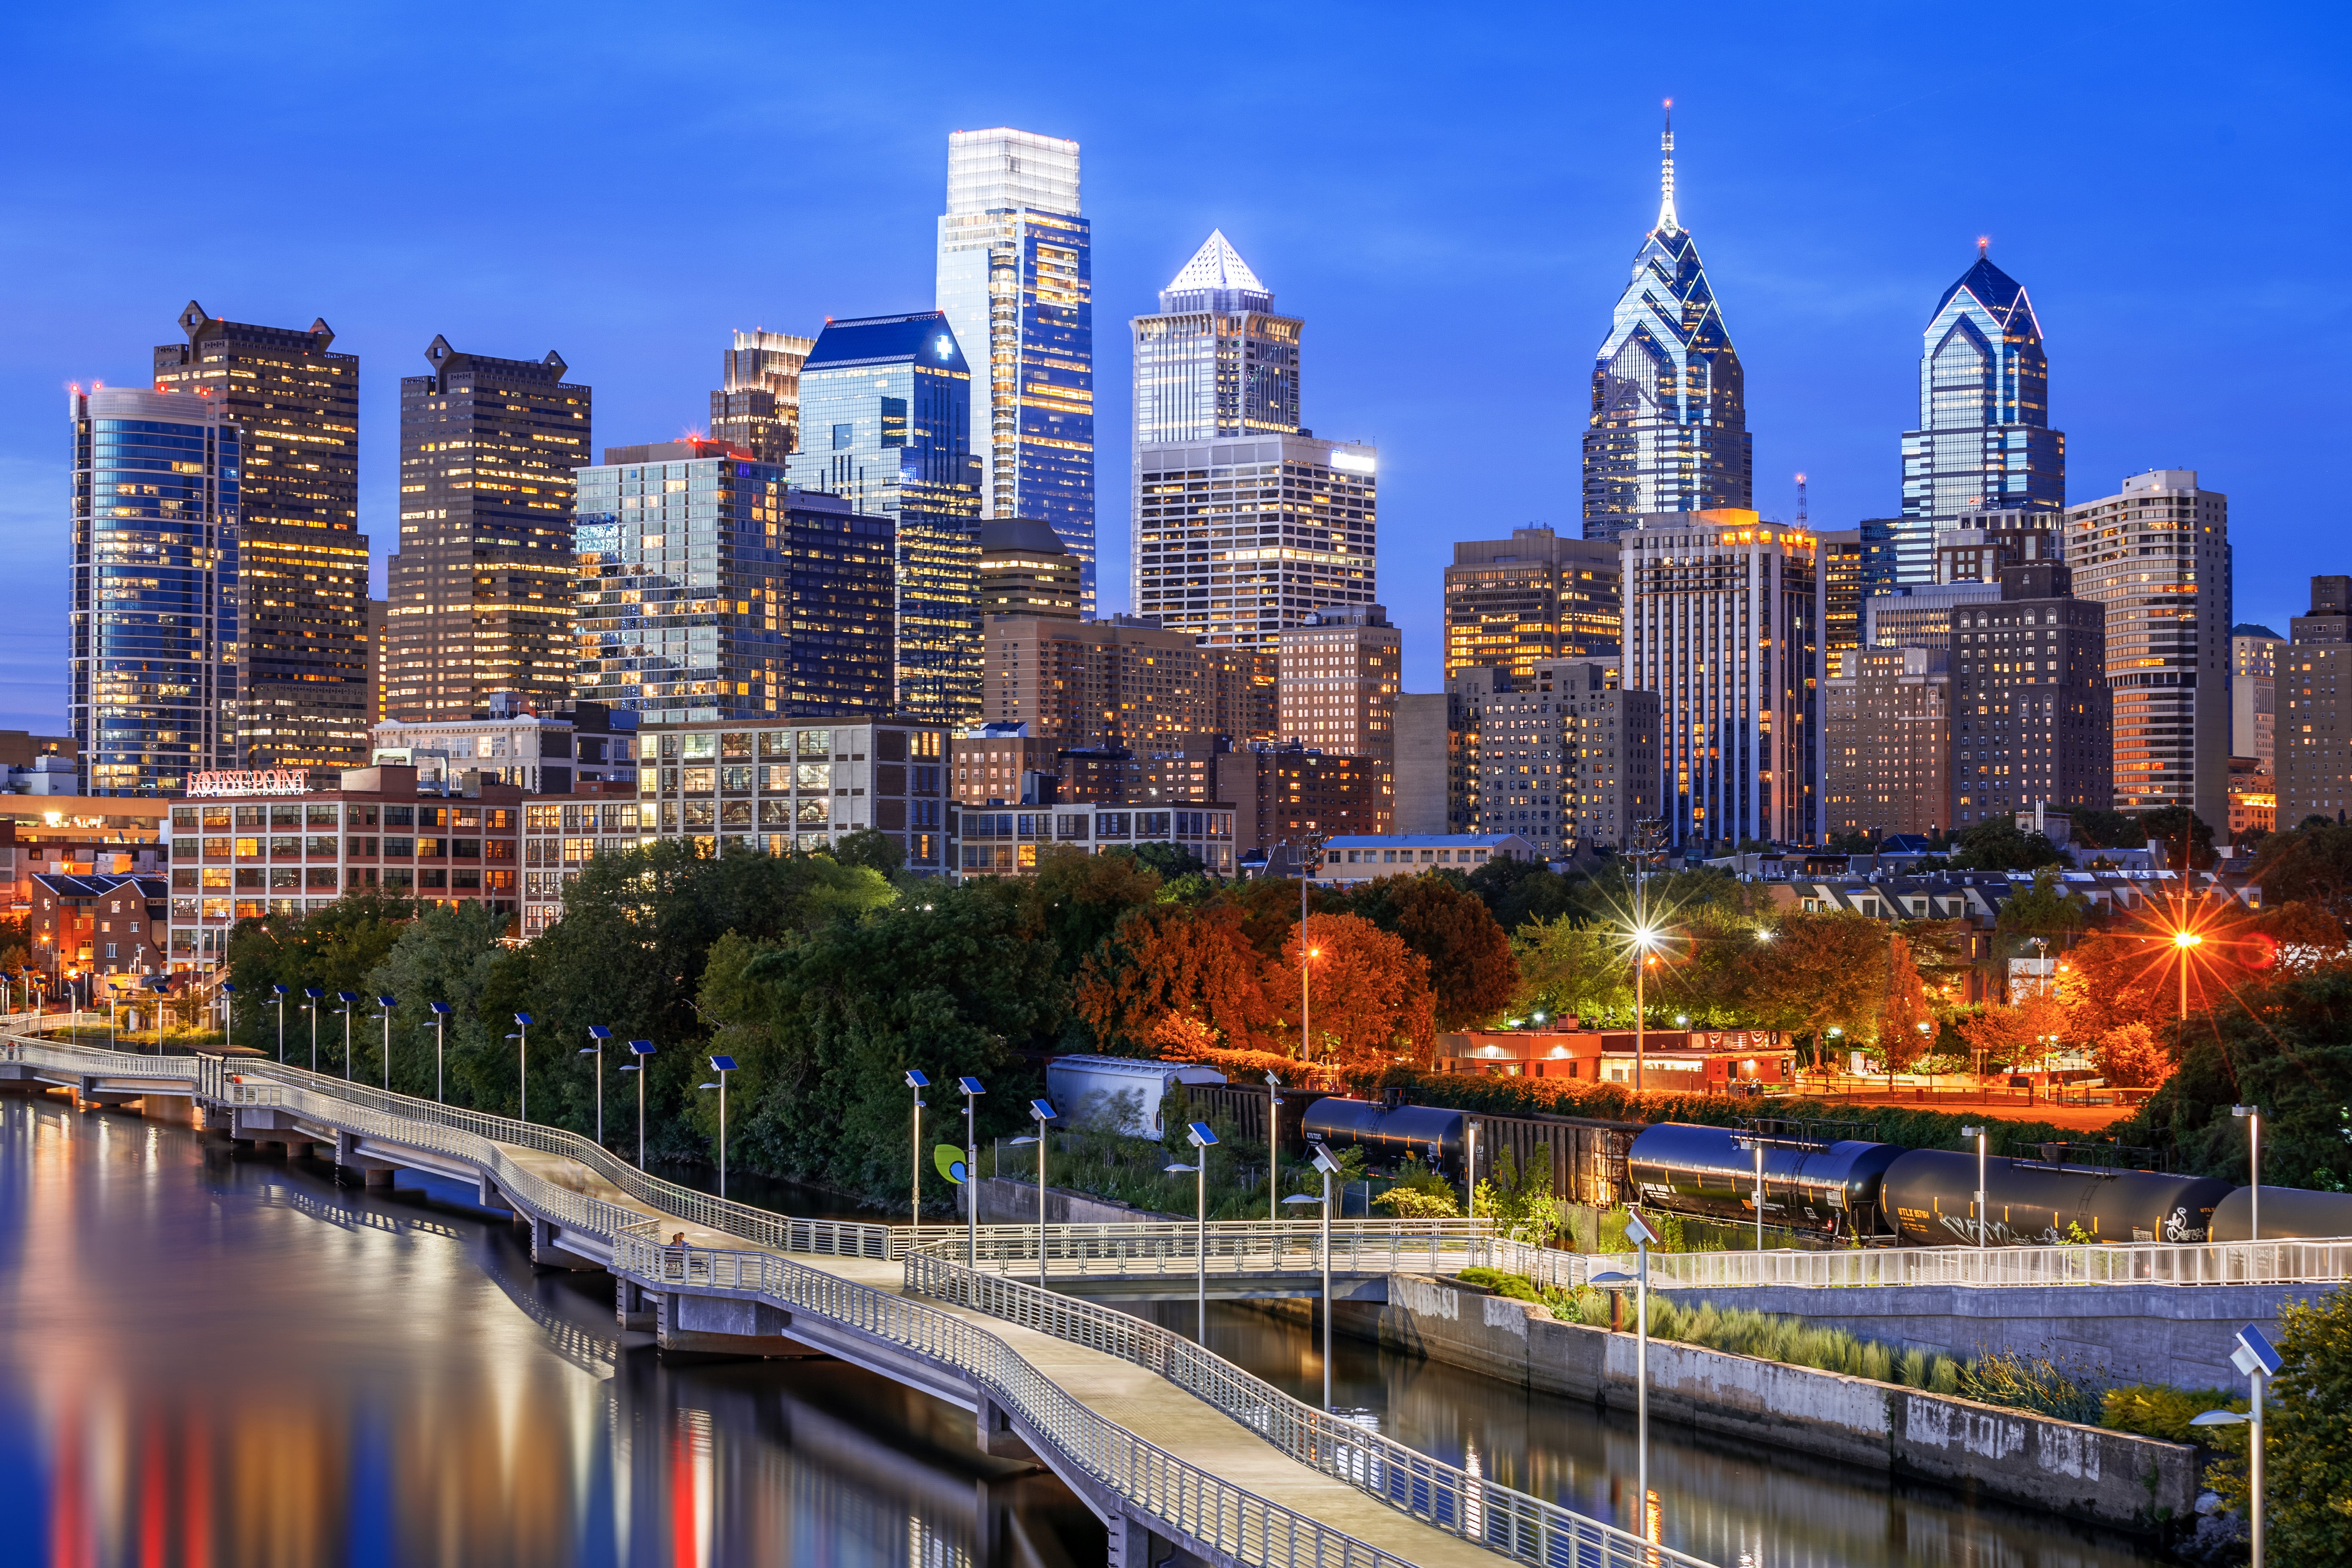 Destination Domestic: 10 Reasons Why Philly Makes a Great Weekend Getaway